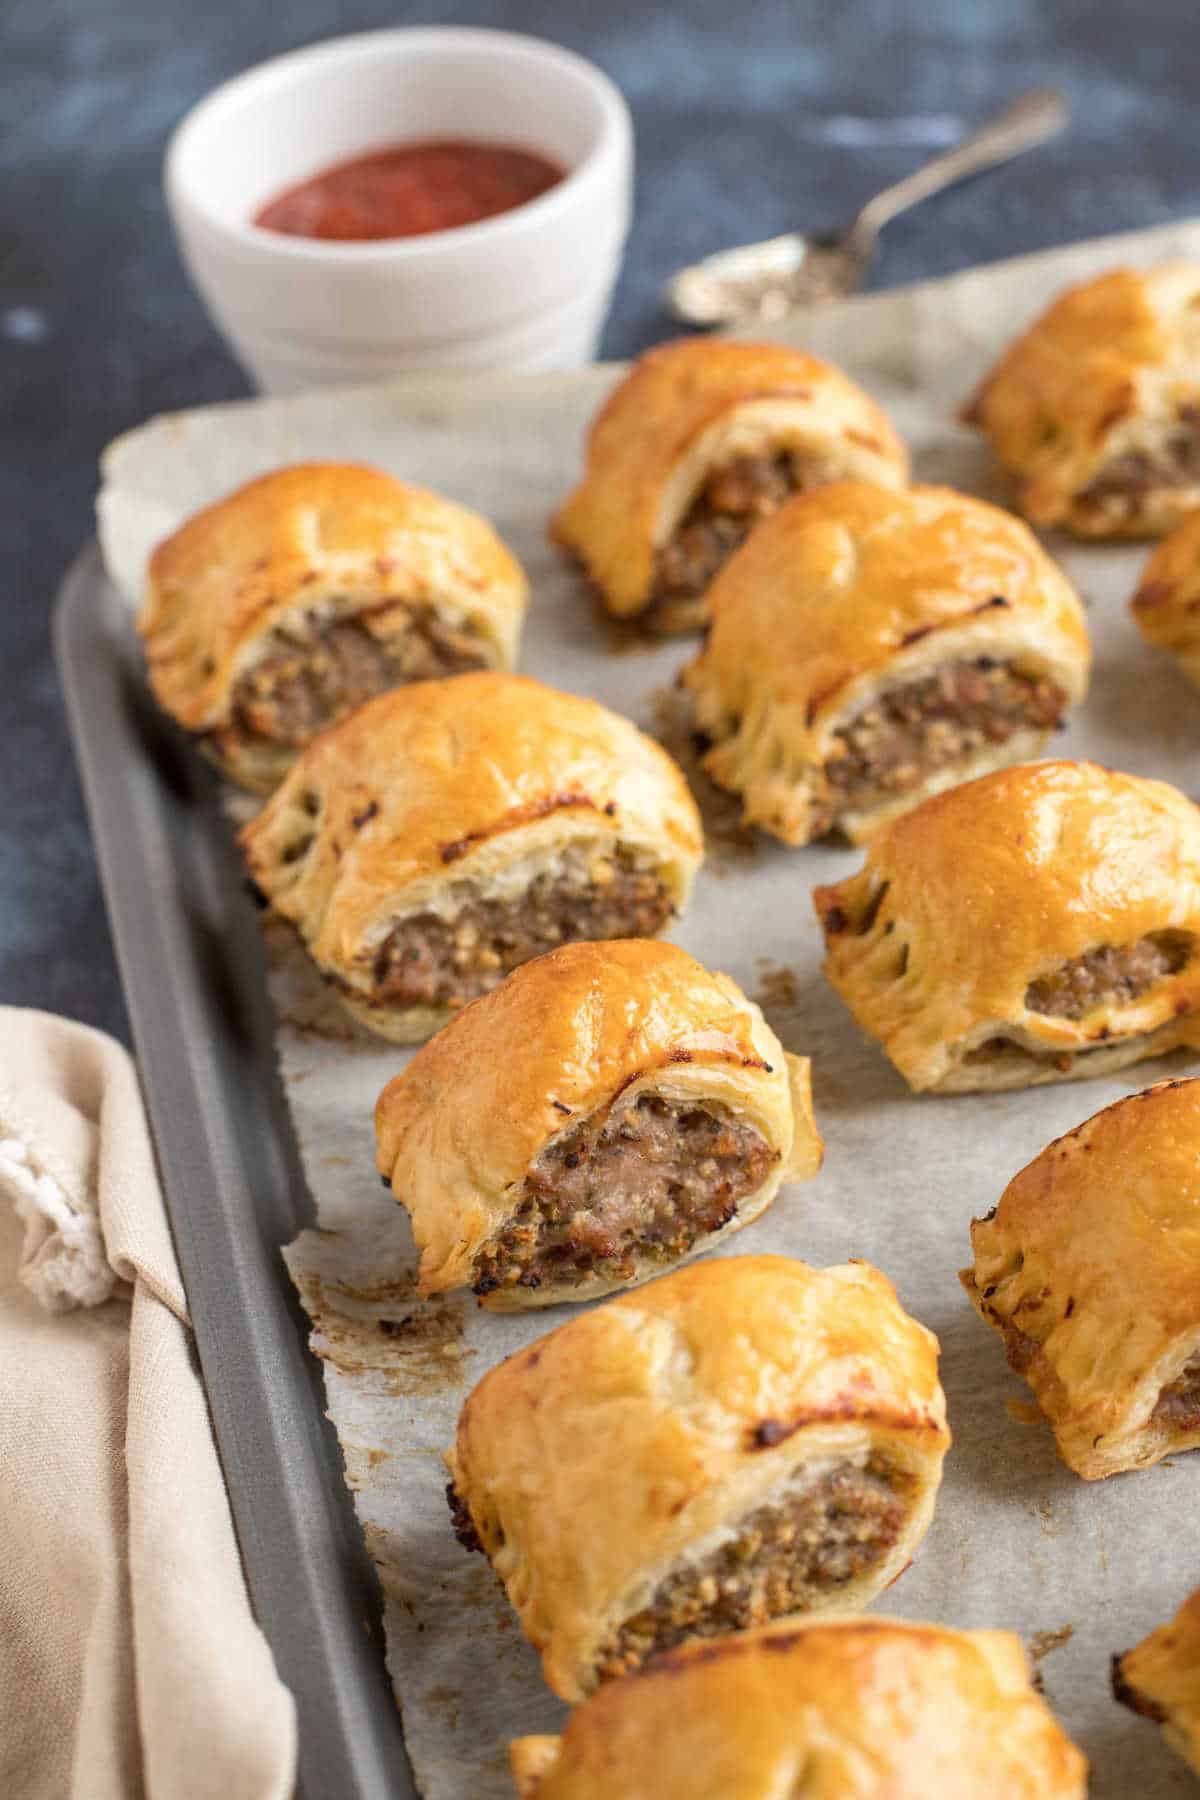 A tray of baked puff pastry sausage rolls with a ketchup dip.